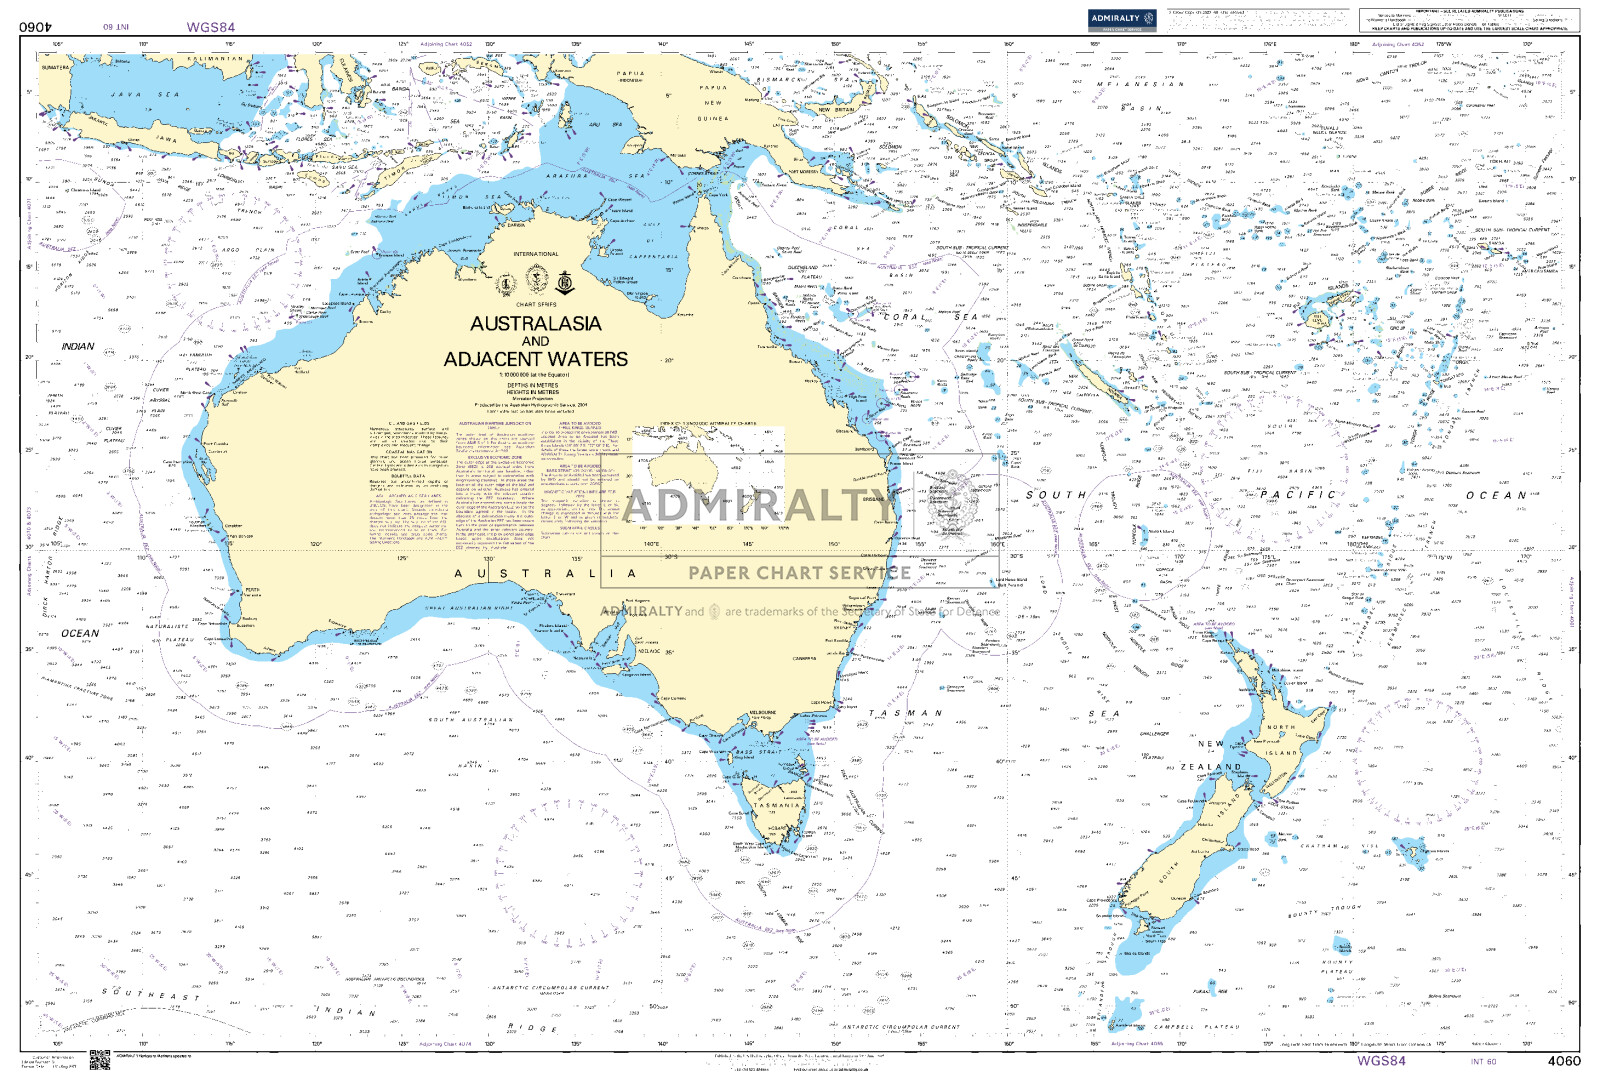 Australasia and Adjacent Waters. UKHO4060